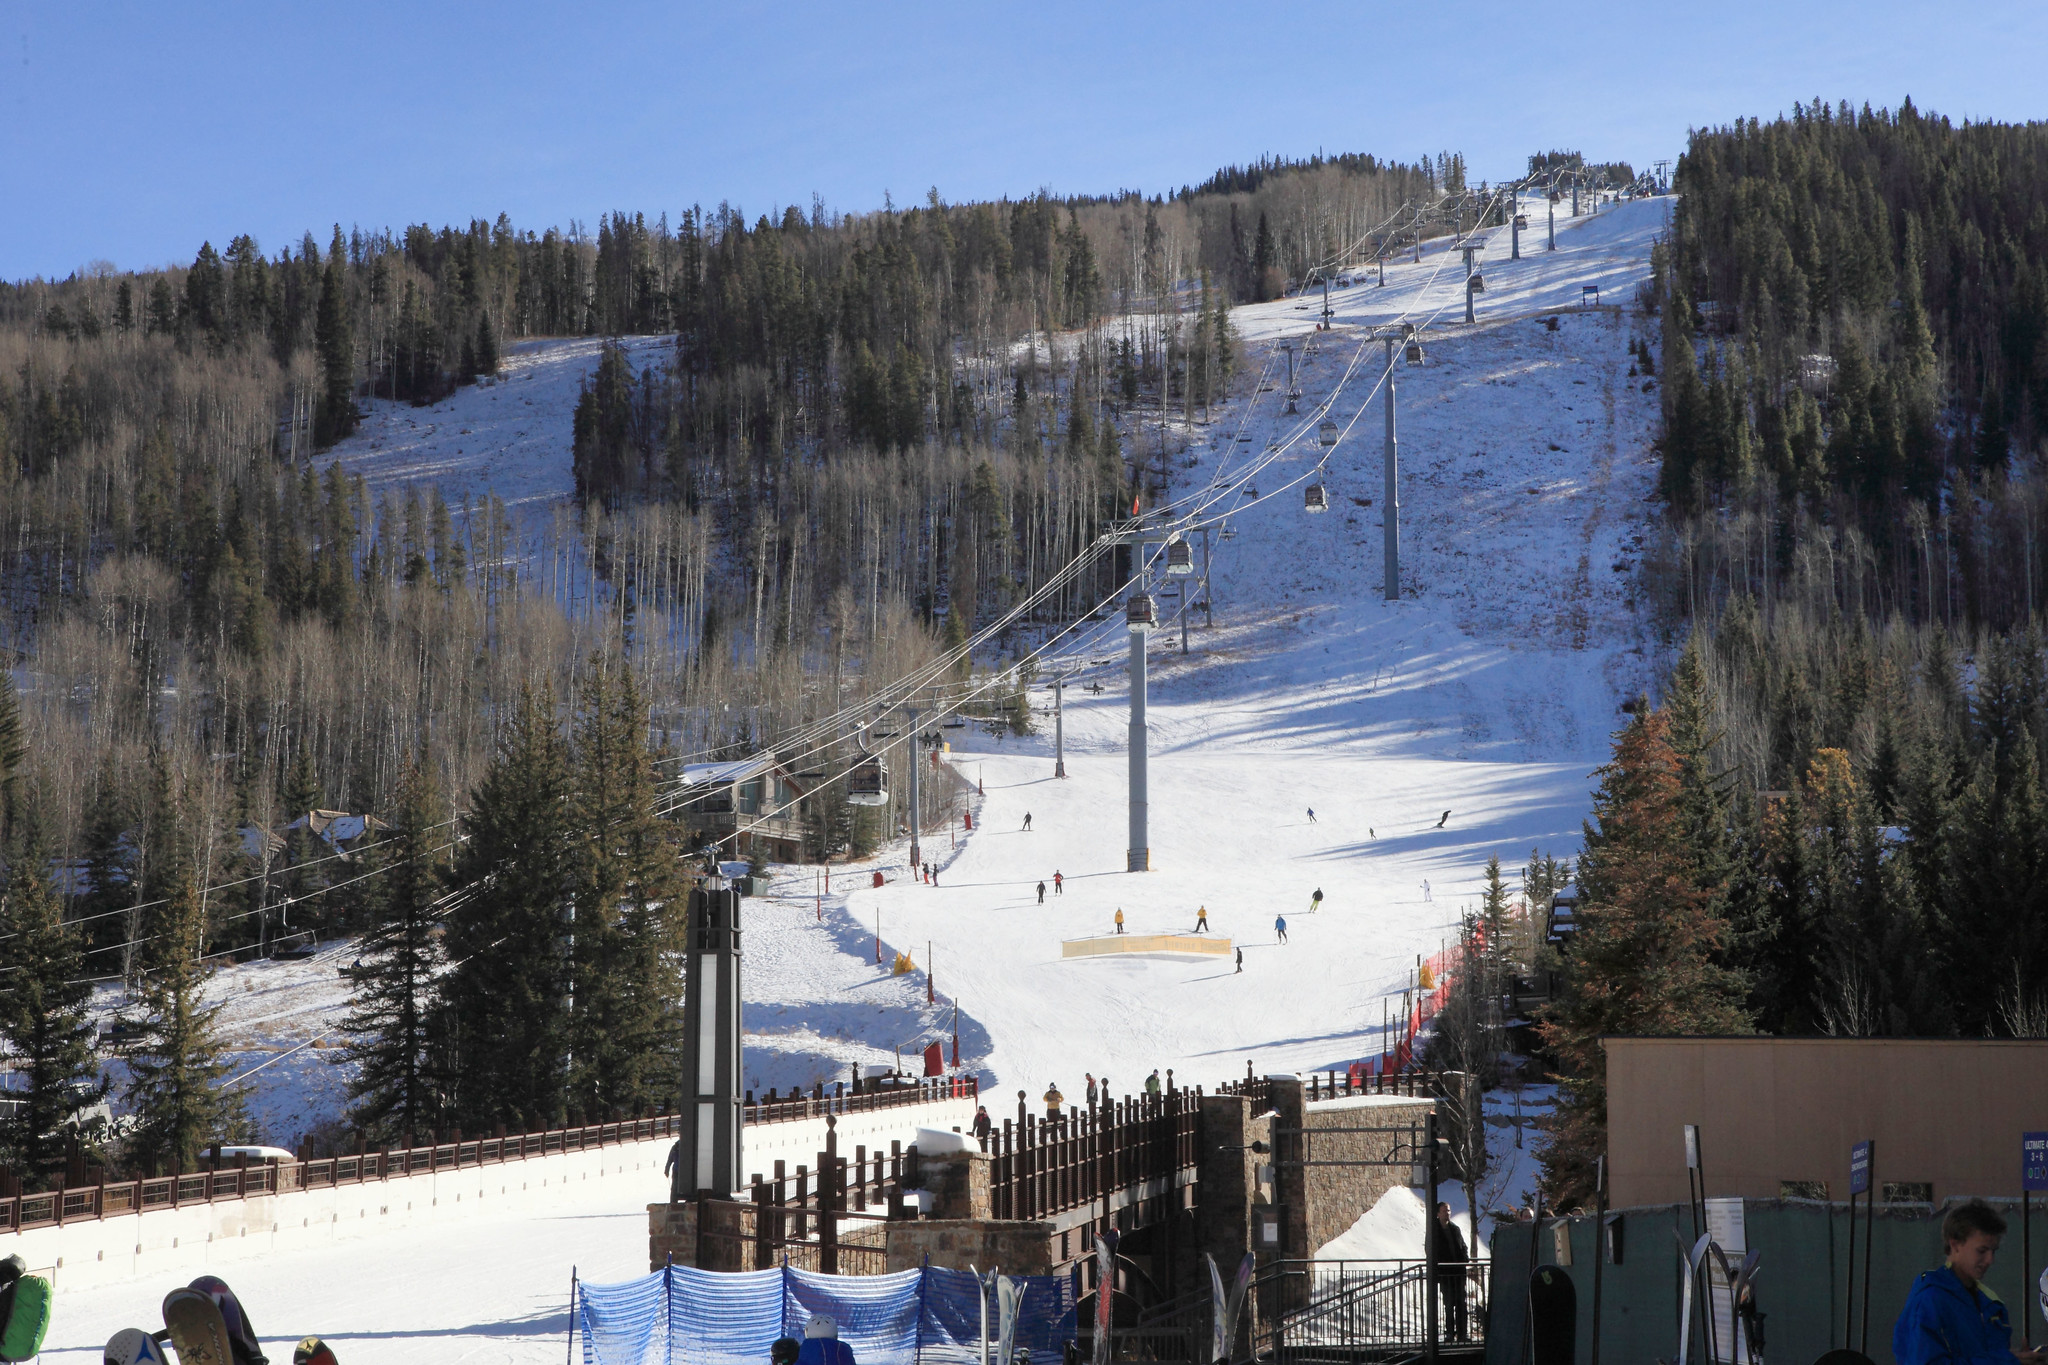 15 Things to do in Vail, Colorado